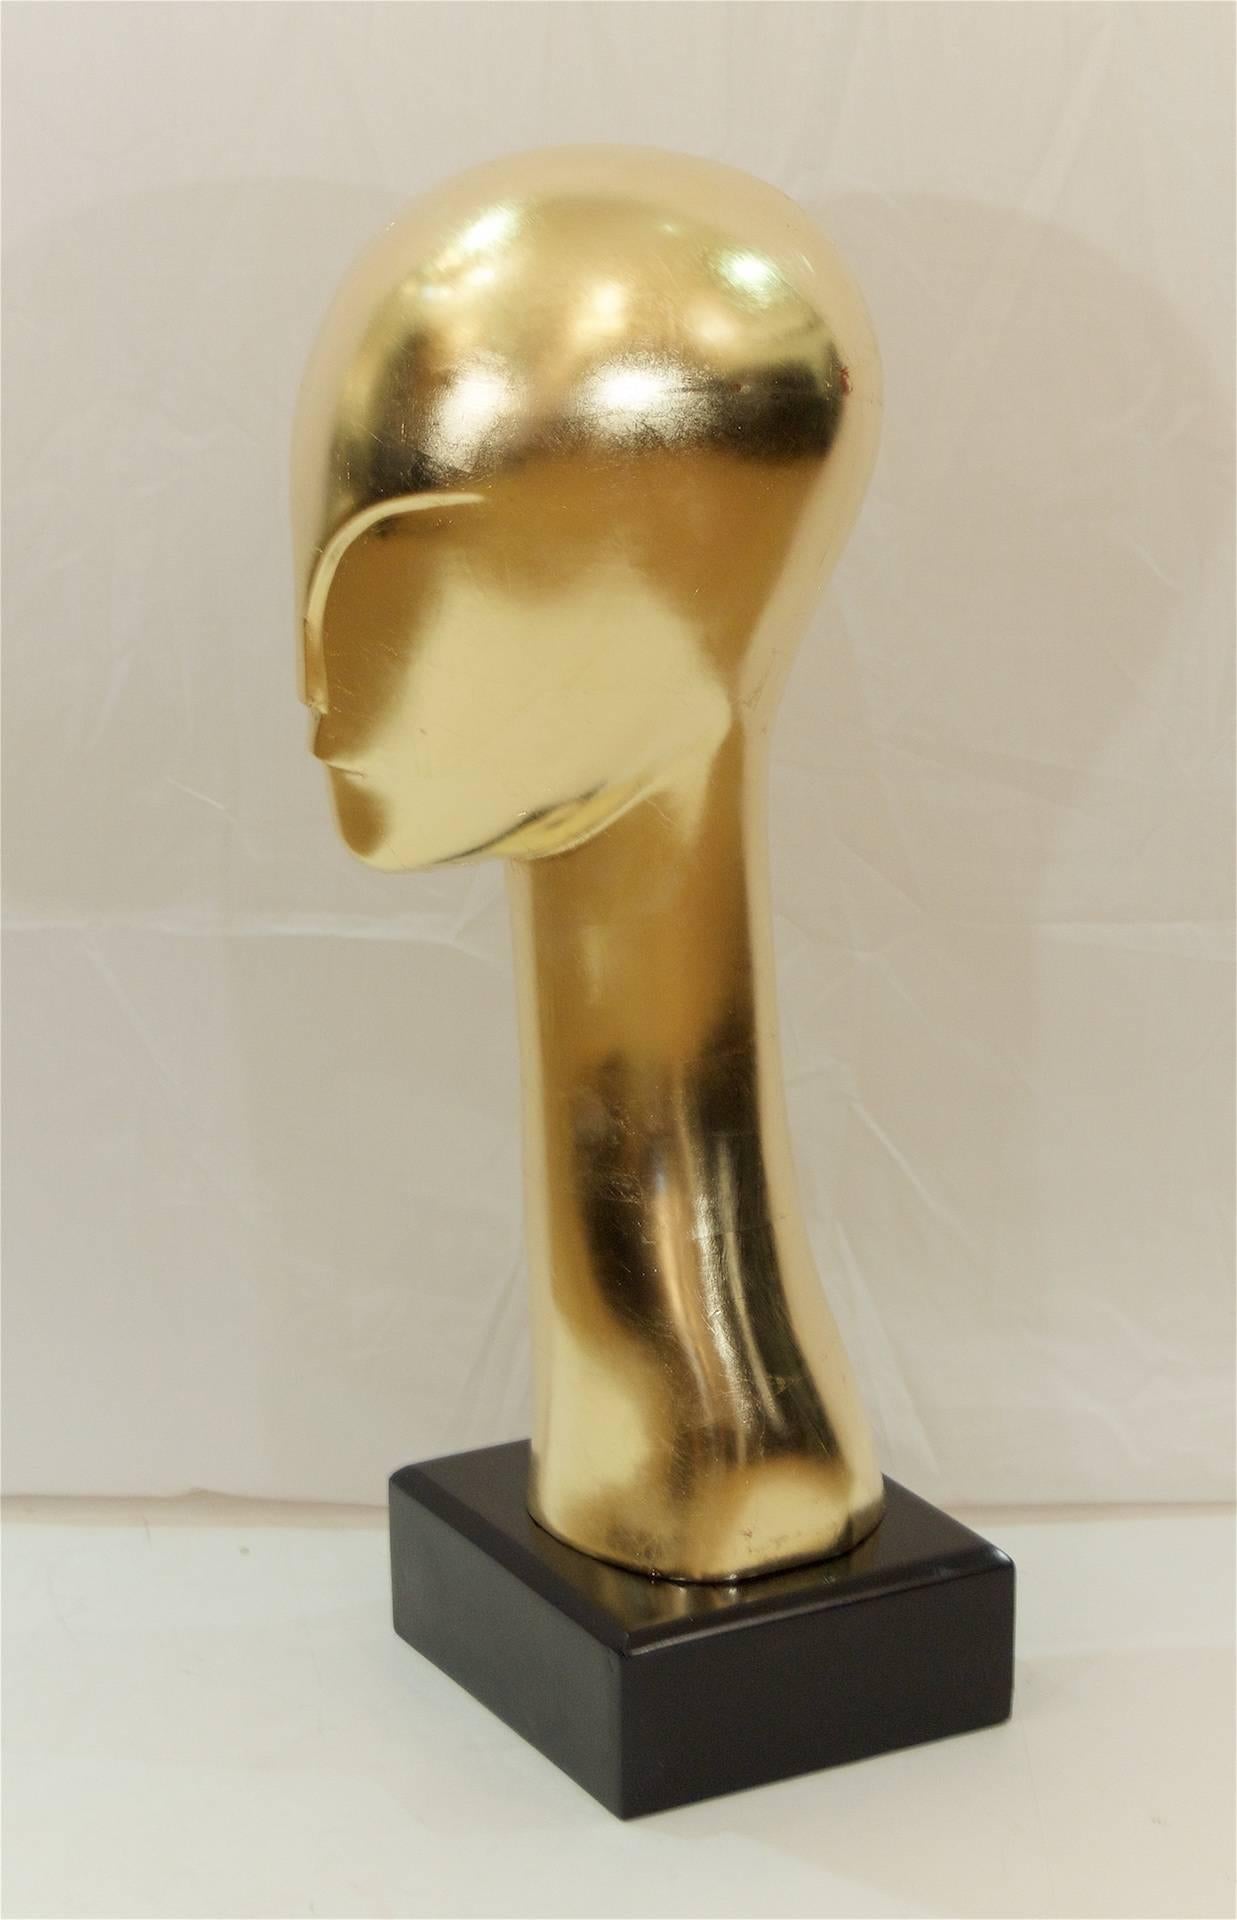 Substantial and elegant gilt solid wood modernist sculpture of a streamlined and minimal presentation of a head and neck, after the manner and contemporary of Constantin Brancusi by an unknown artist. Newly re-gilt. The base is black lacquered